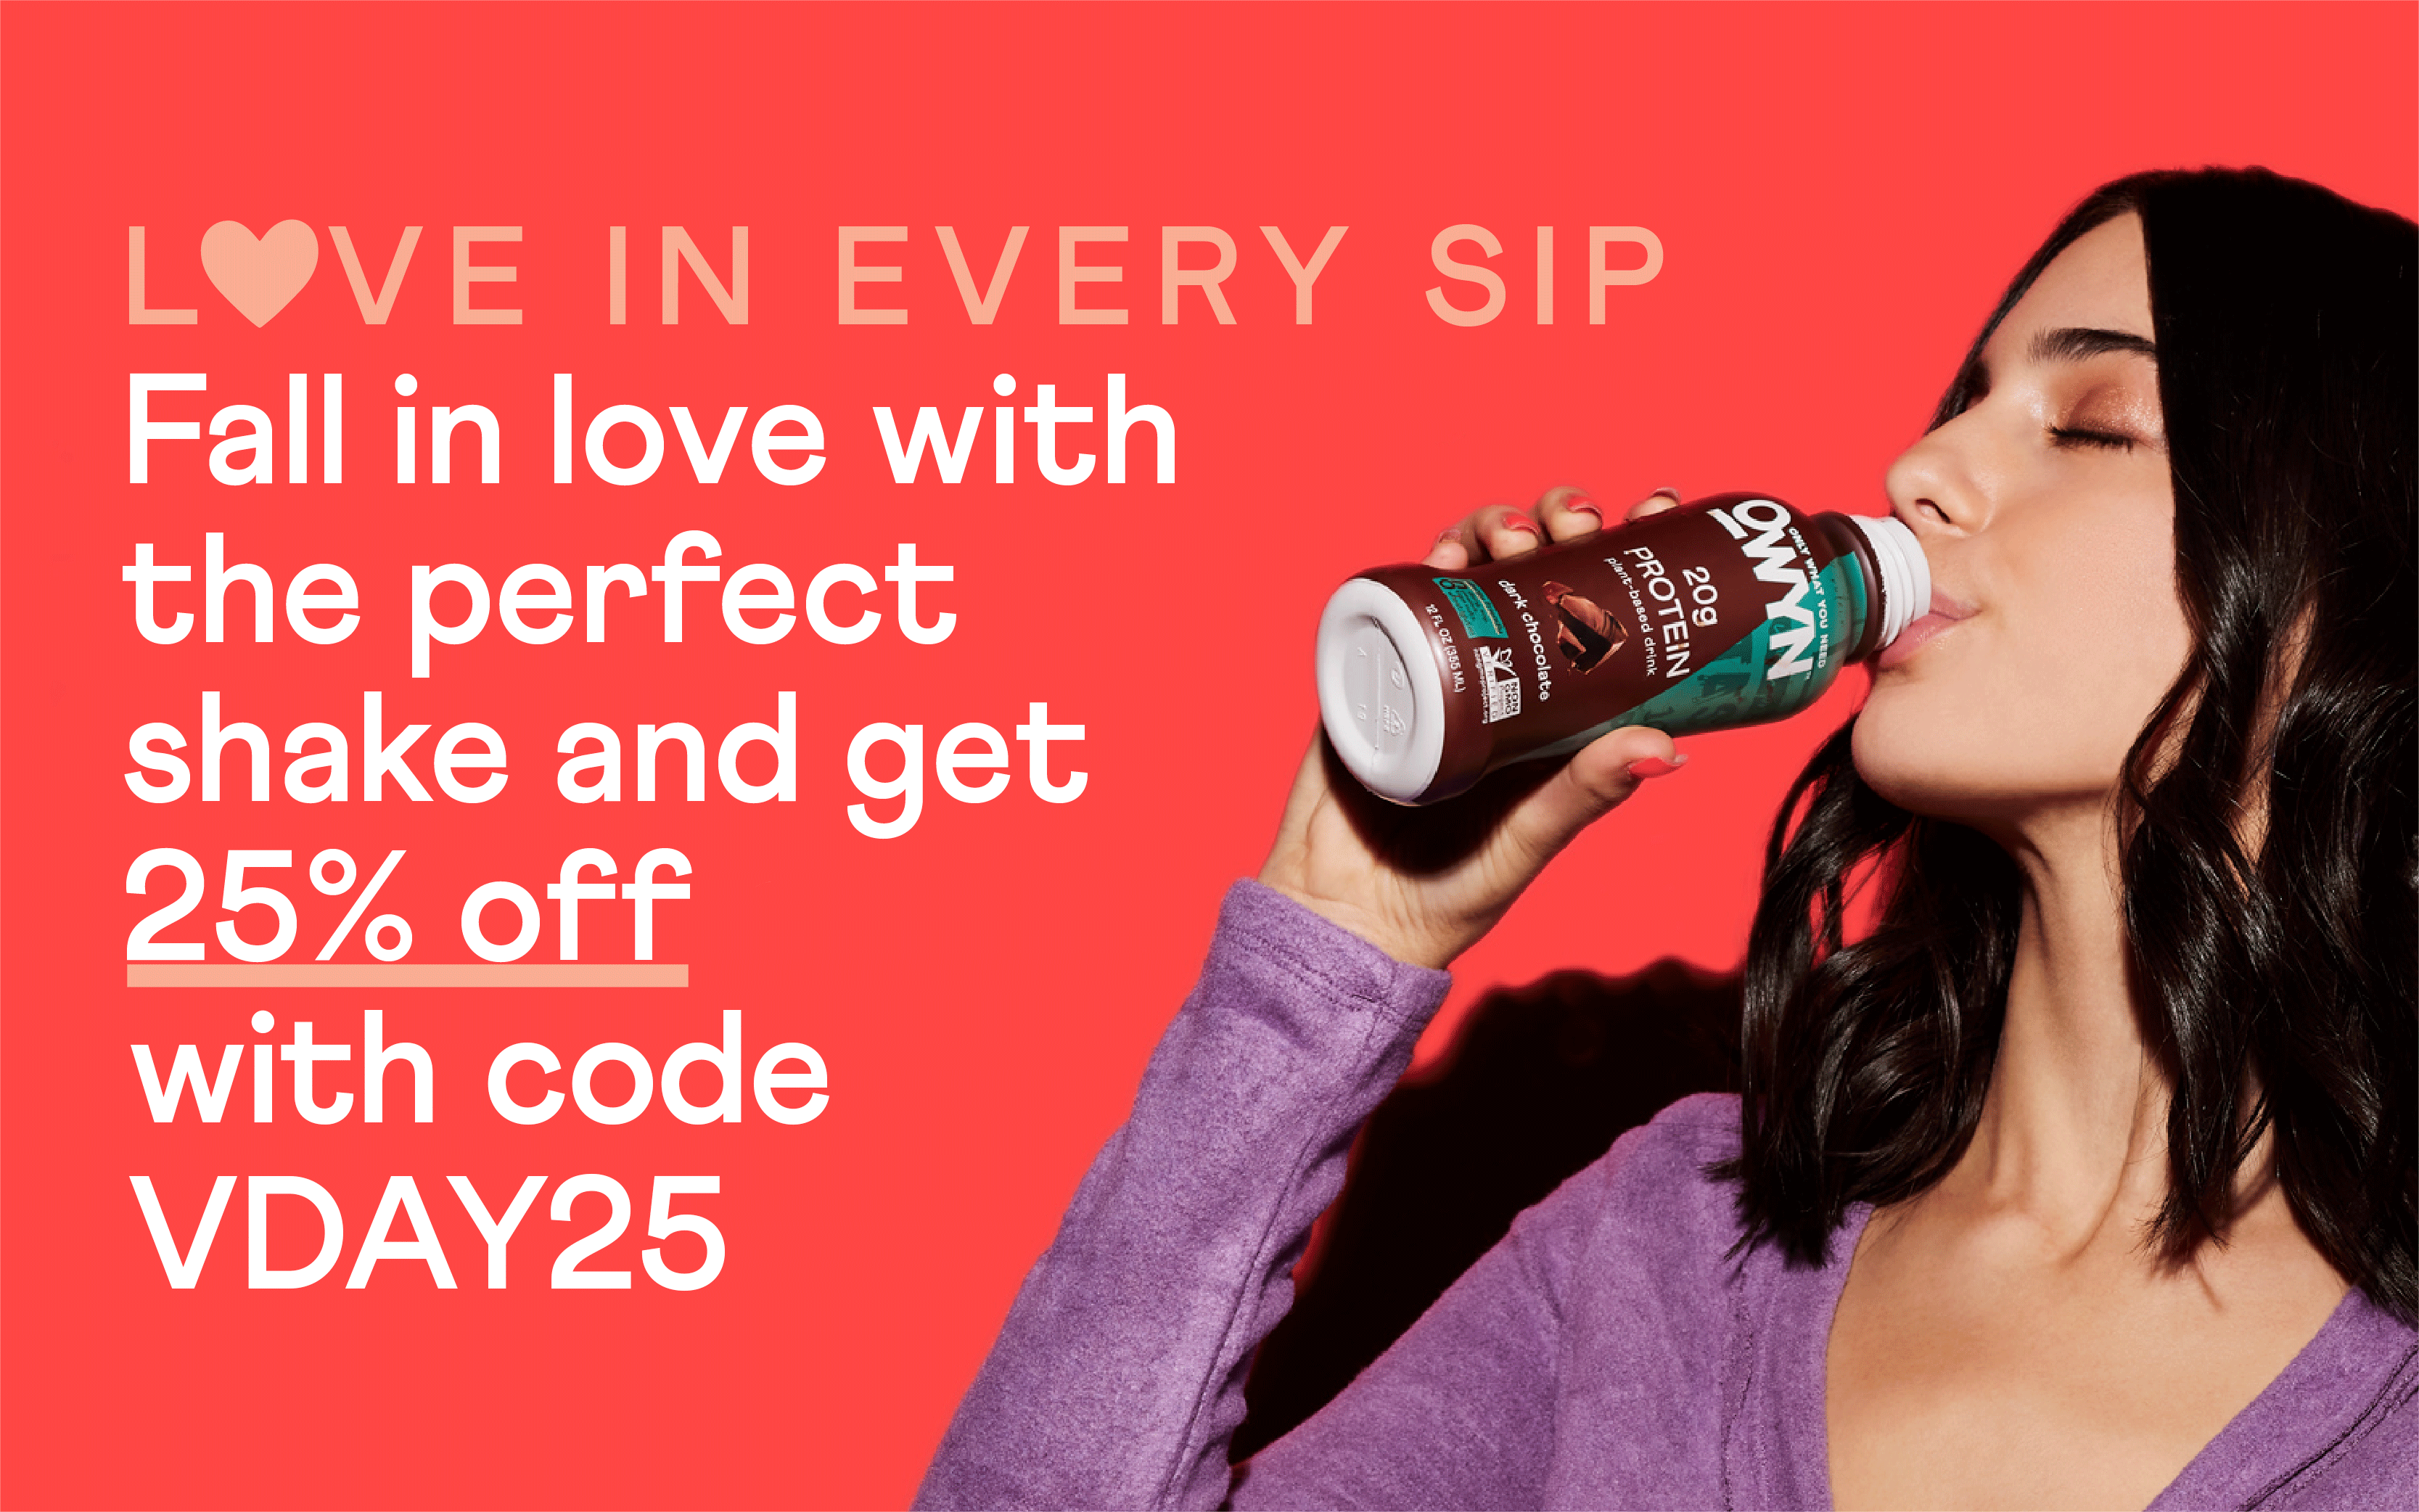 Love in every sip. 25% off 